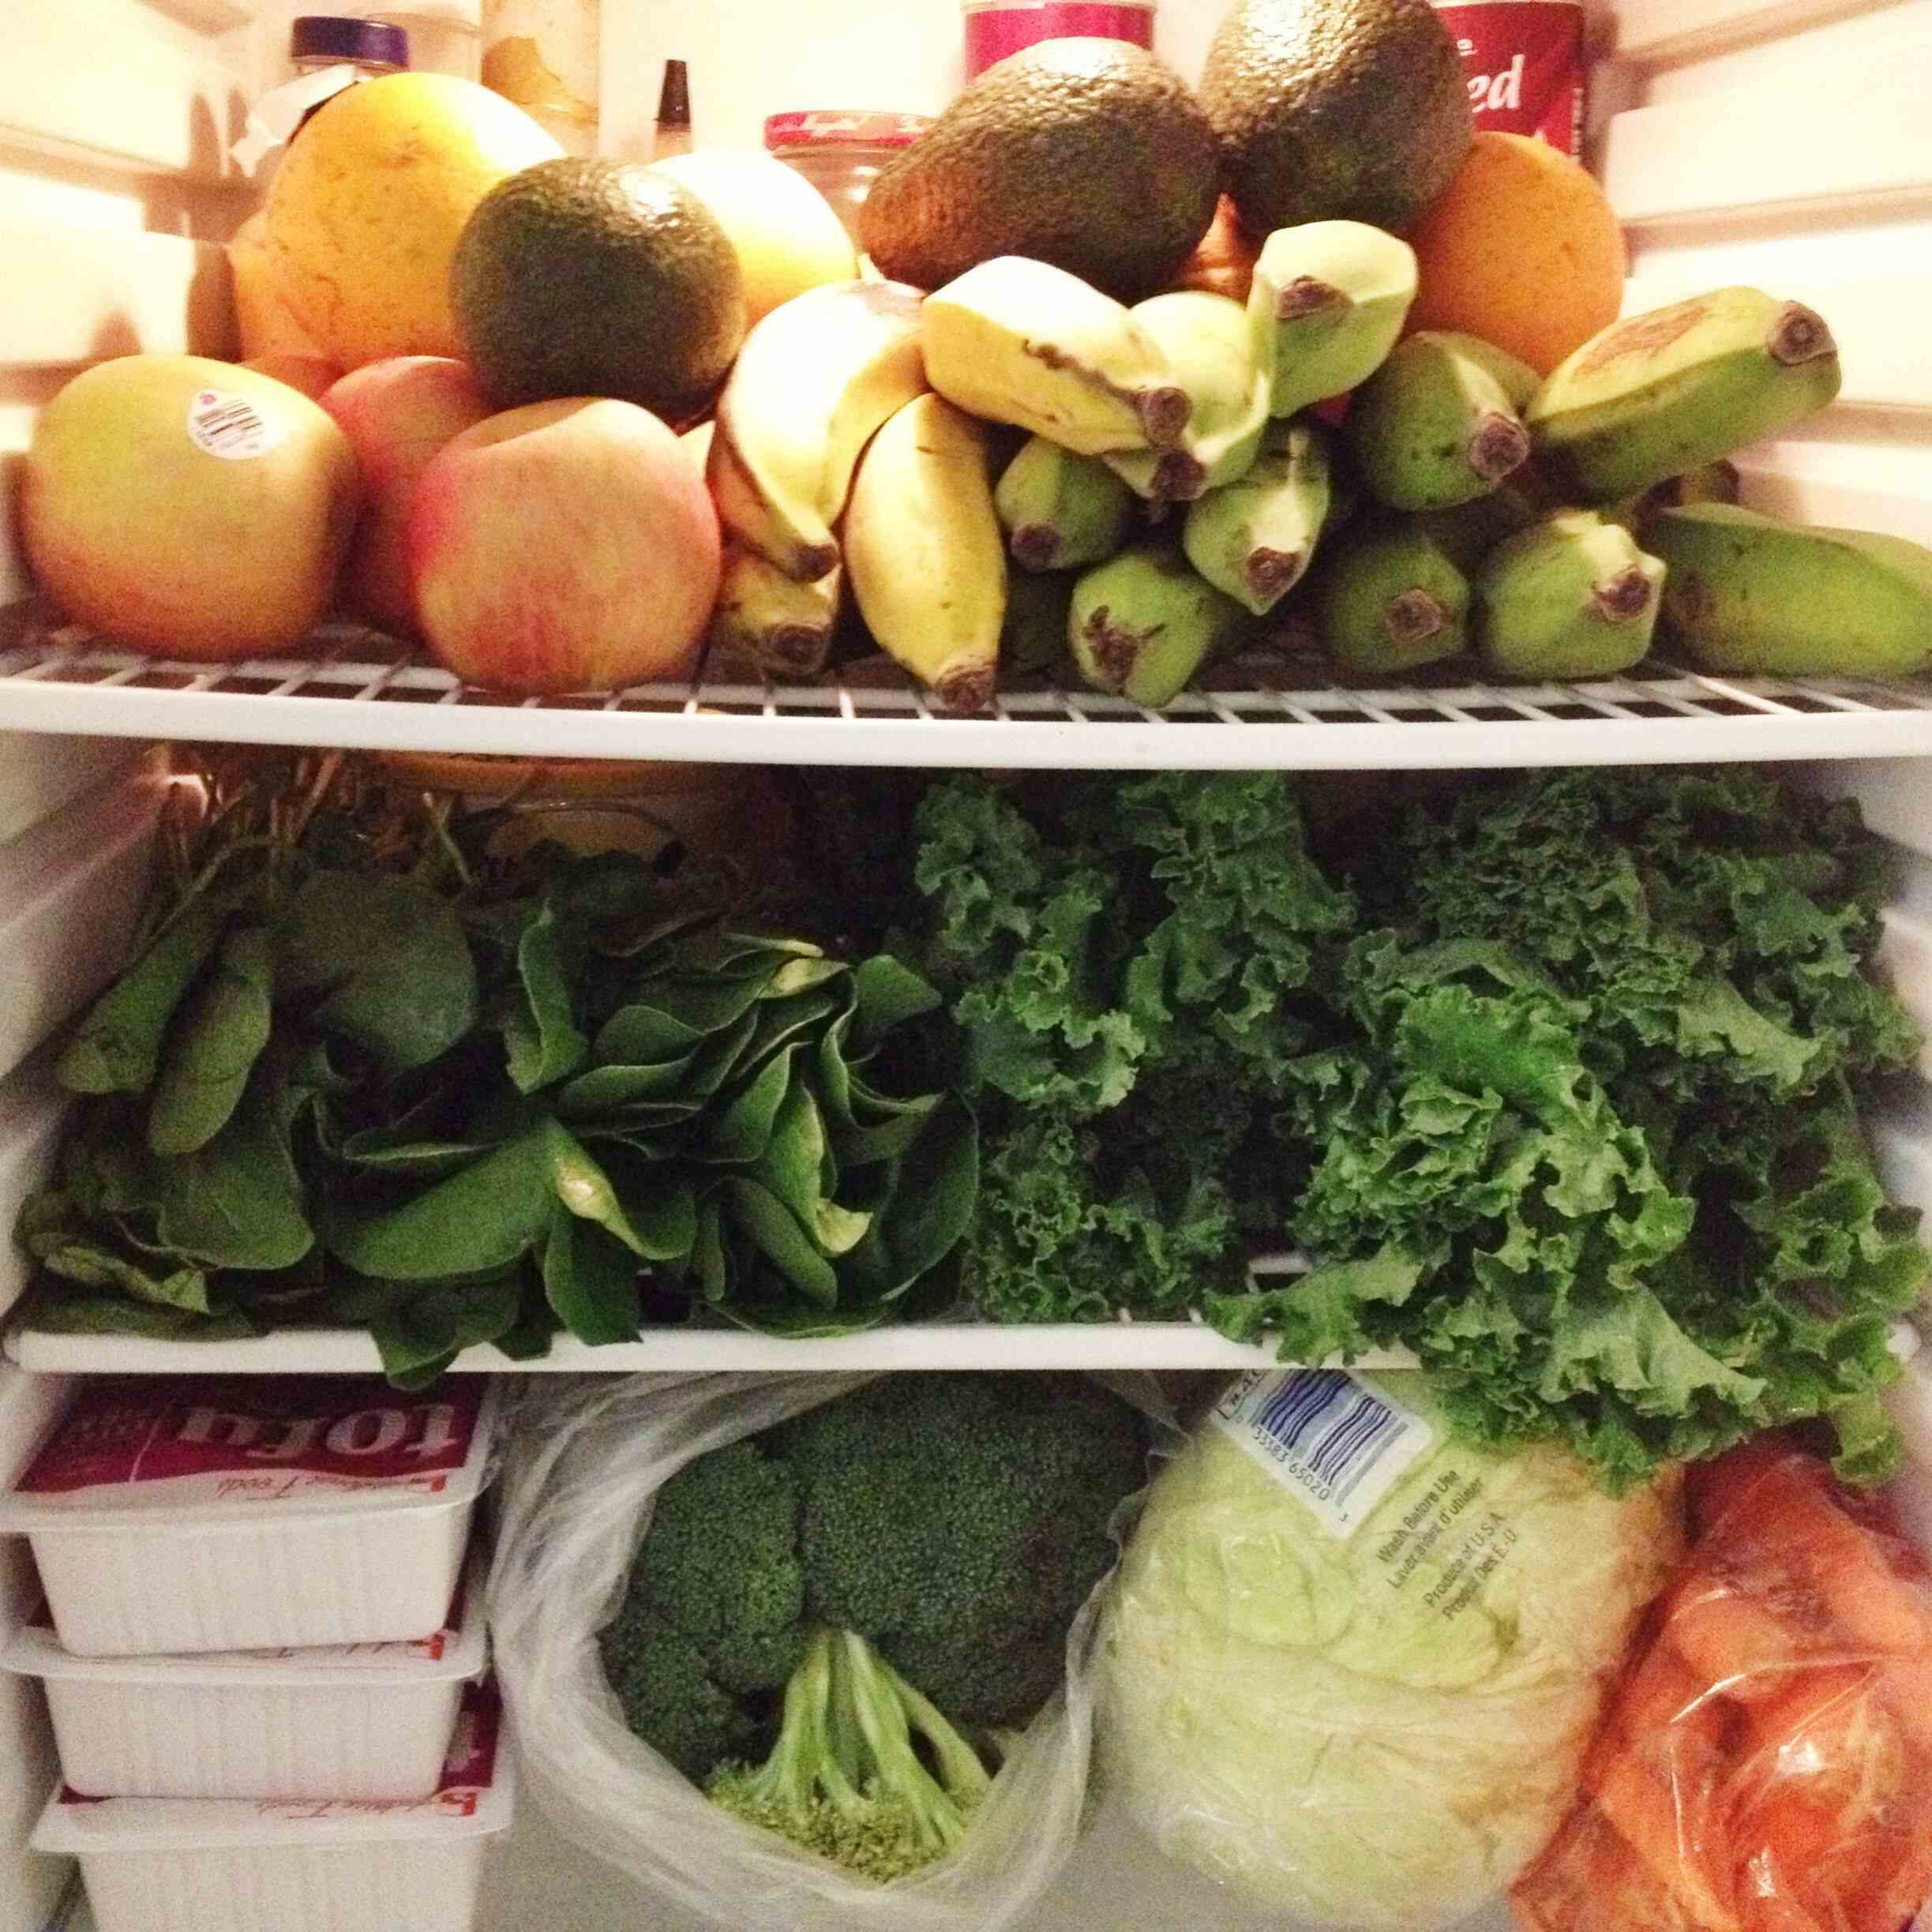 How To Store Produce In The Fridge